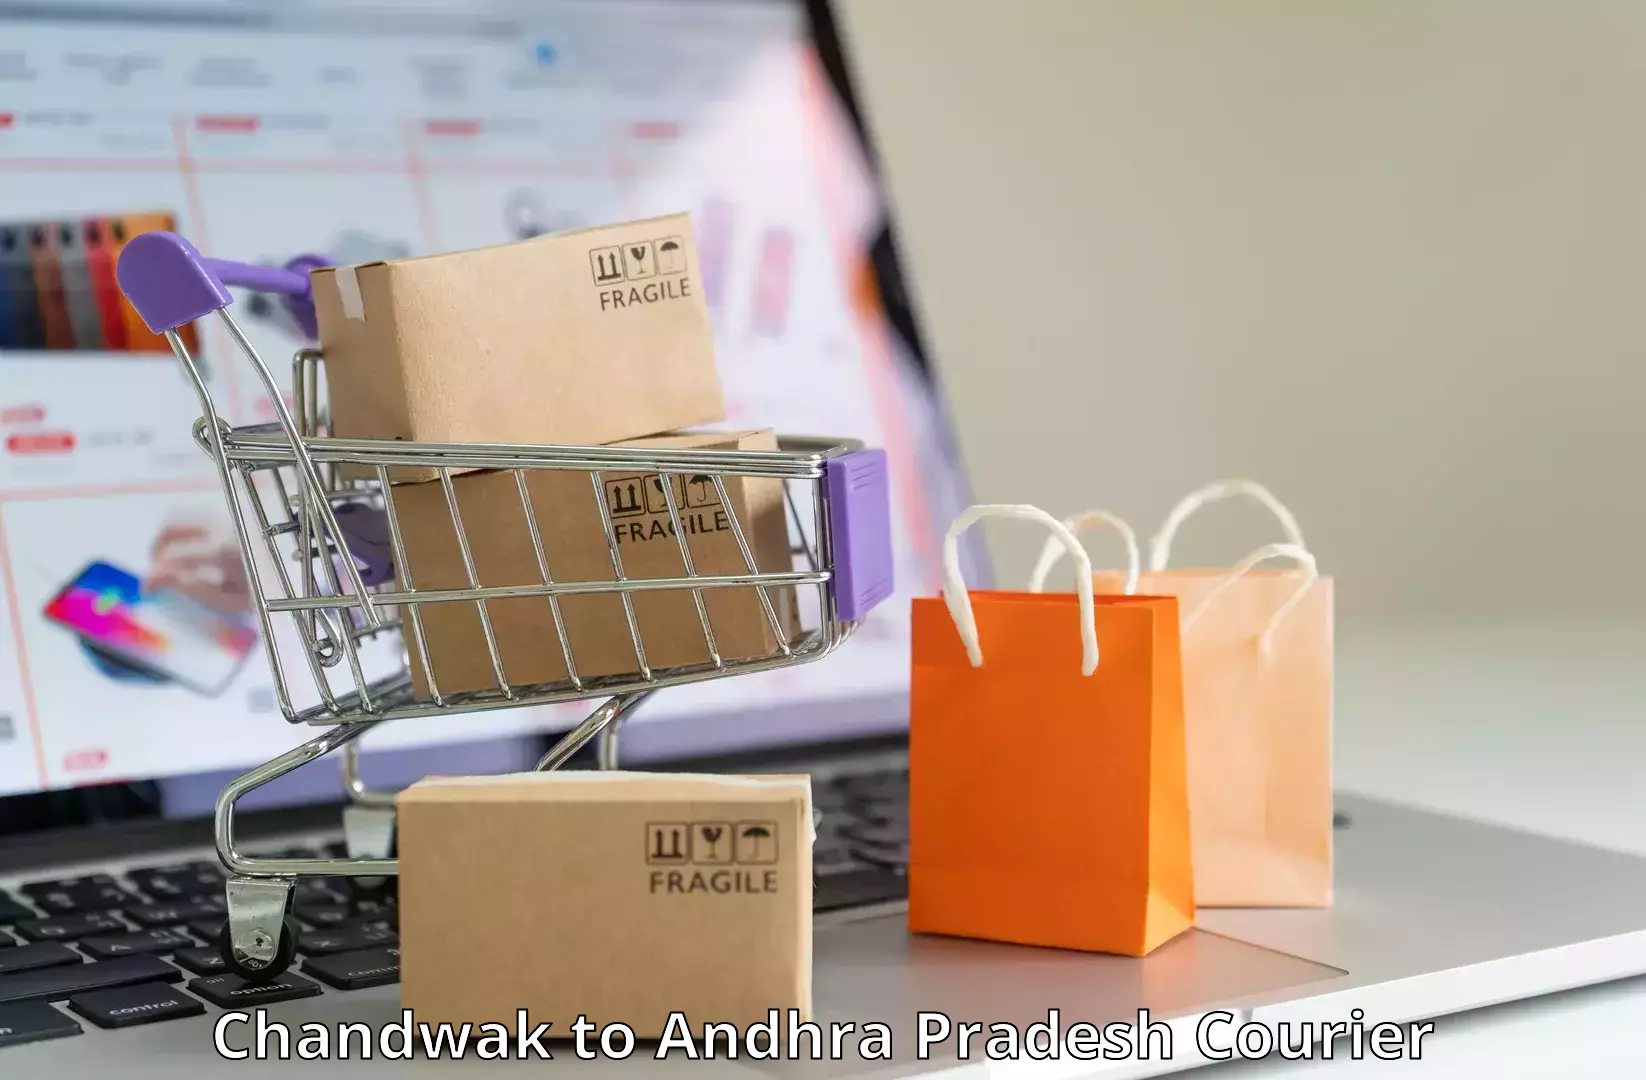 Full-service courier options Chandwak to Andhra Pradesh